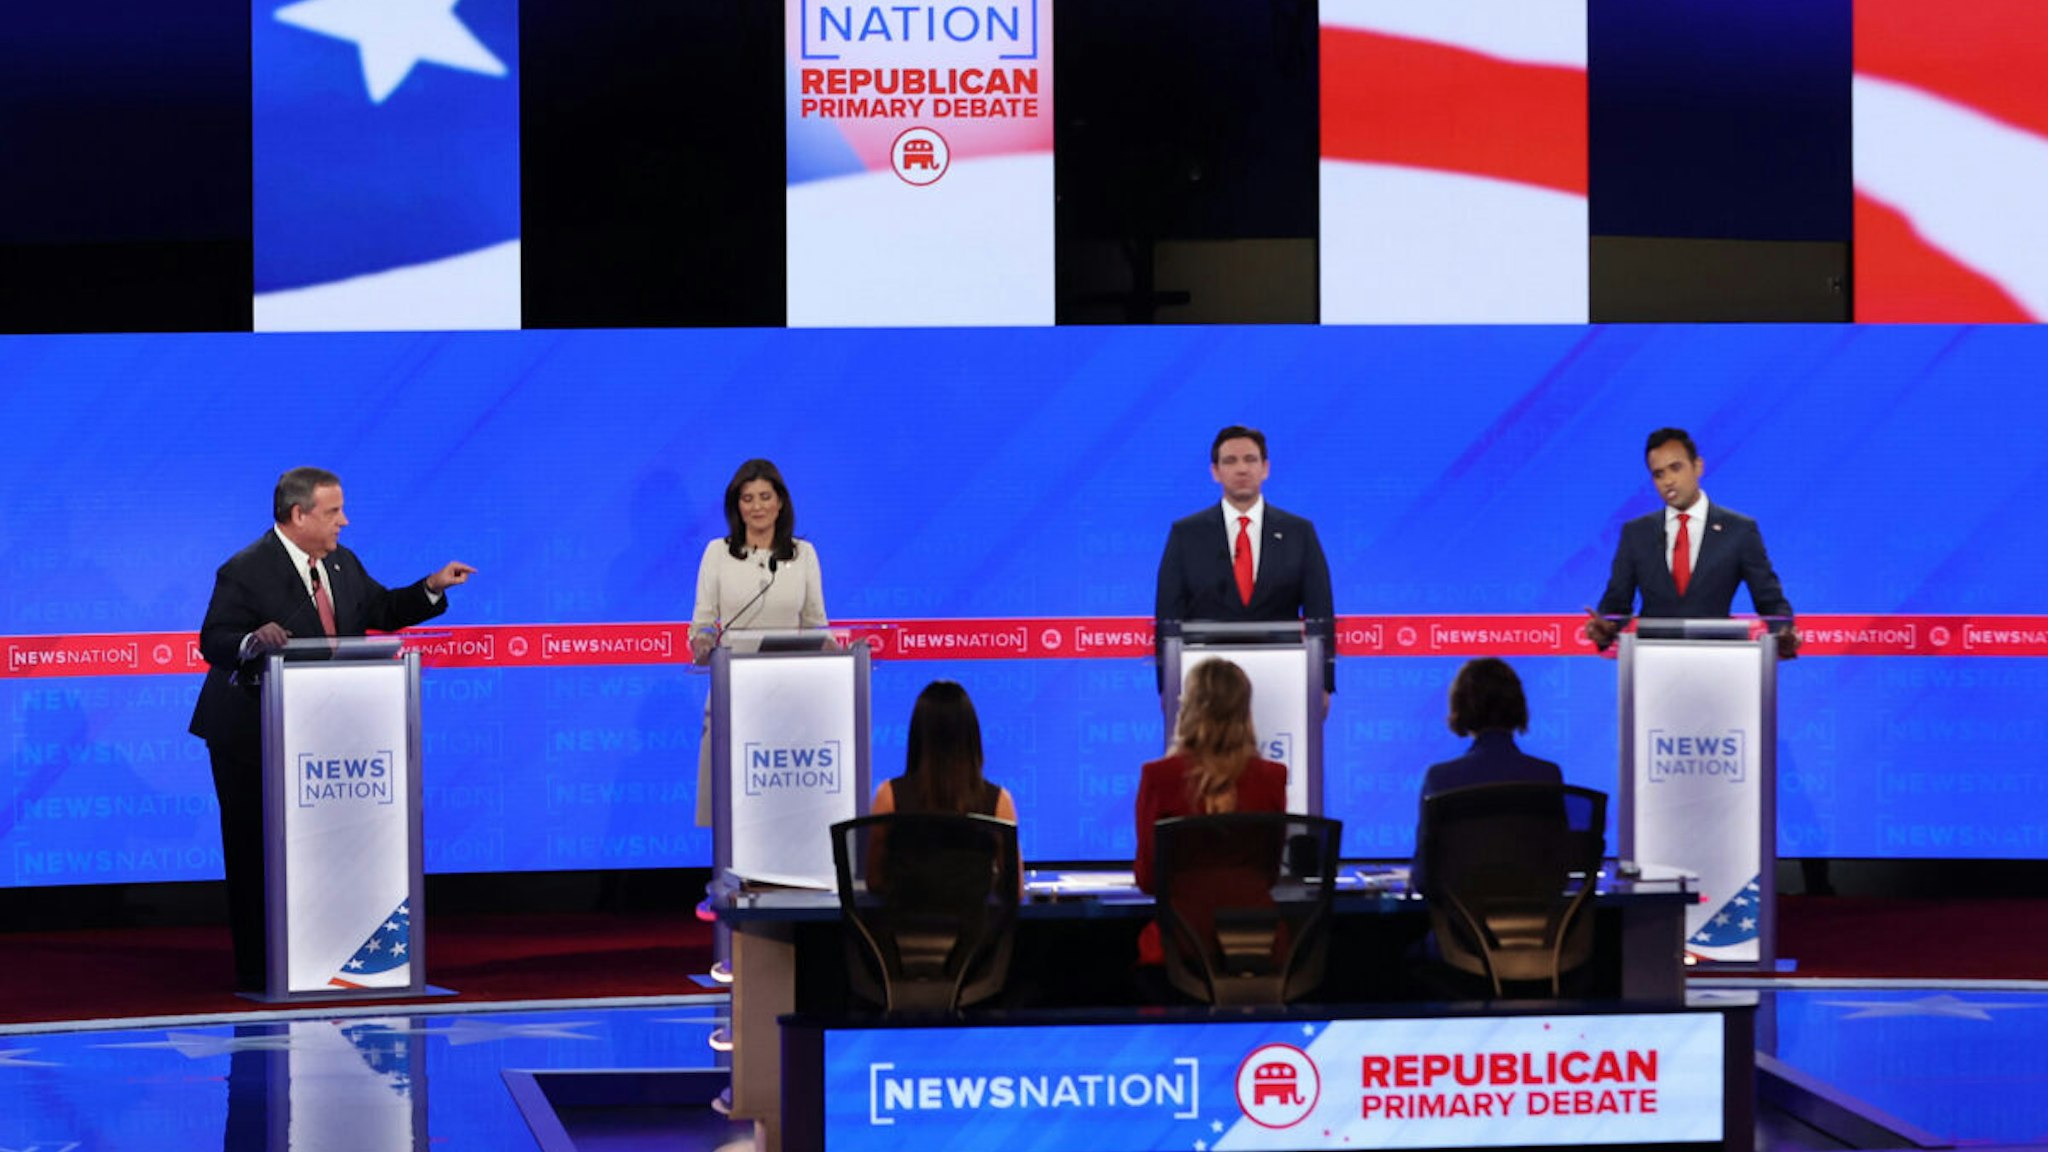 TUSCALOOSA, ALABAMA - DECEMBER 06: Republican presidential candidates (L-R) former New Jersey Gov. Chris Christie, former U.N. Ambassador Nikki Haley, Florida Gov. Ron DeSantis and Vivek Ramaswamy participate in the NewsNation Republican Presidential Primary Debate at the University of Alabama Moody Music Hall on December 6, 2023 in Tuscaloosa, Alabama. The four presidential hopefuls squared off during the fourth Republican primary debate without current frontrunner and former U.S. President Donald Trump, who has declined to participate in any of the previous debates.